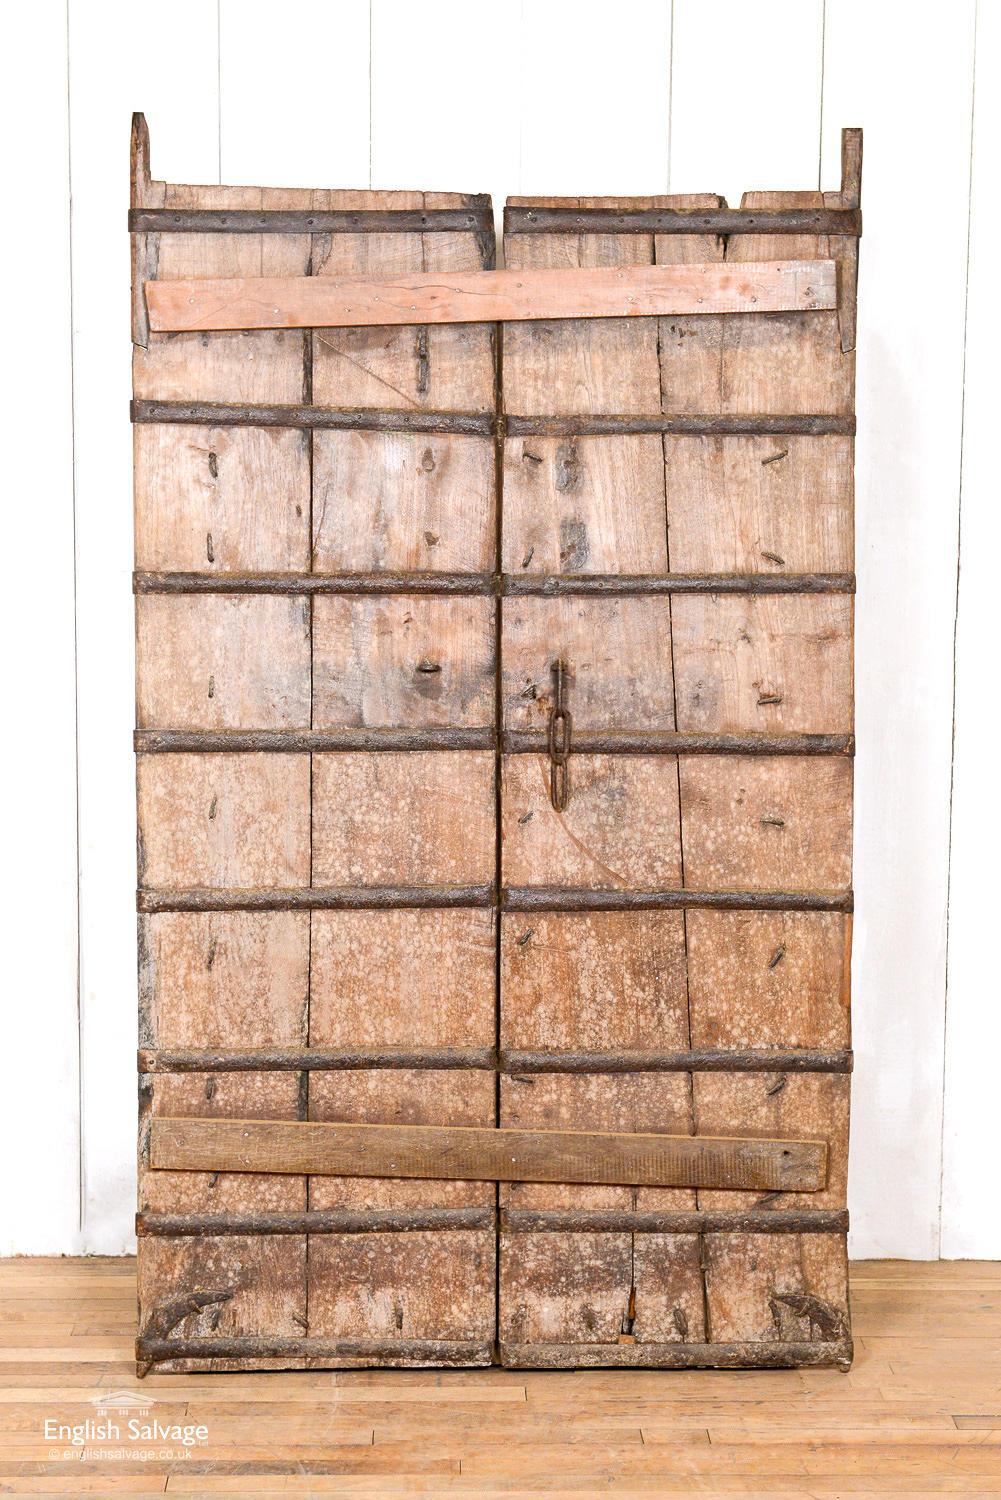 Salvaged teak Indian pair of doors with barred back. Old iron work studs still present. One side with carvings and one side plain. Some scrapes, splits and scuffs commensurate with age.